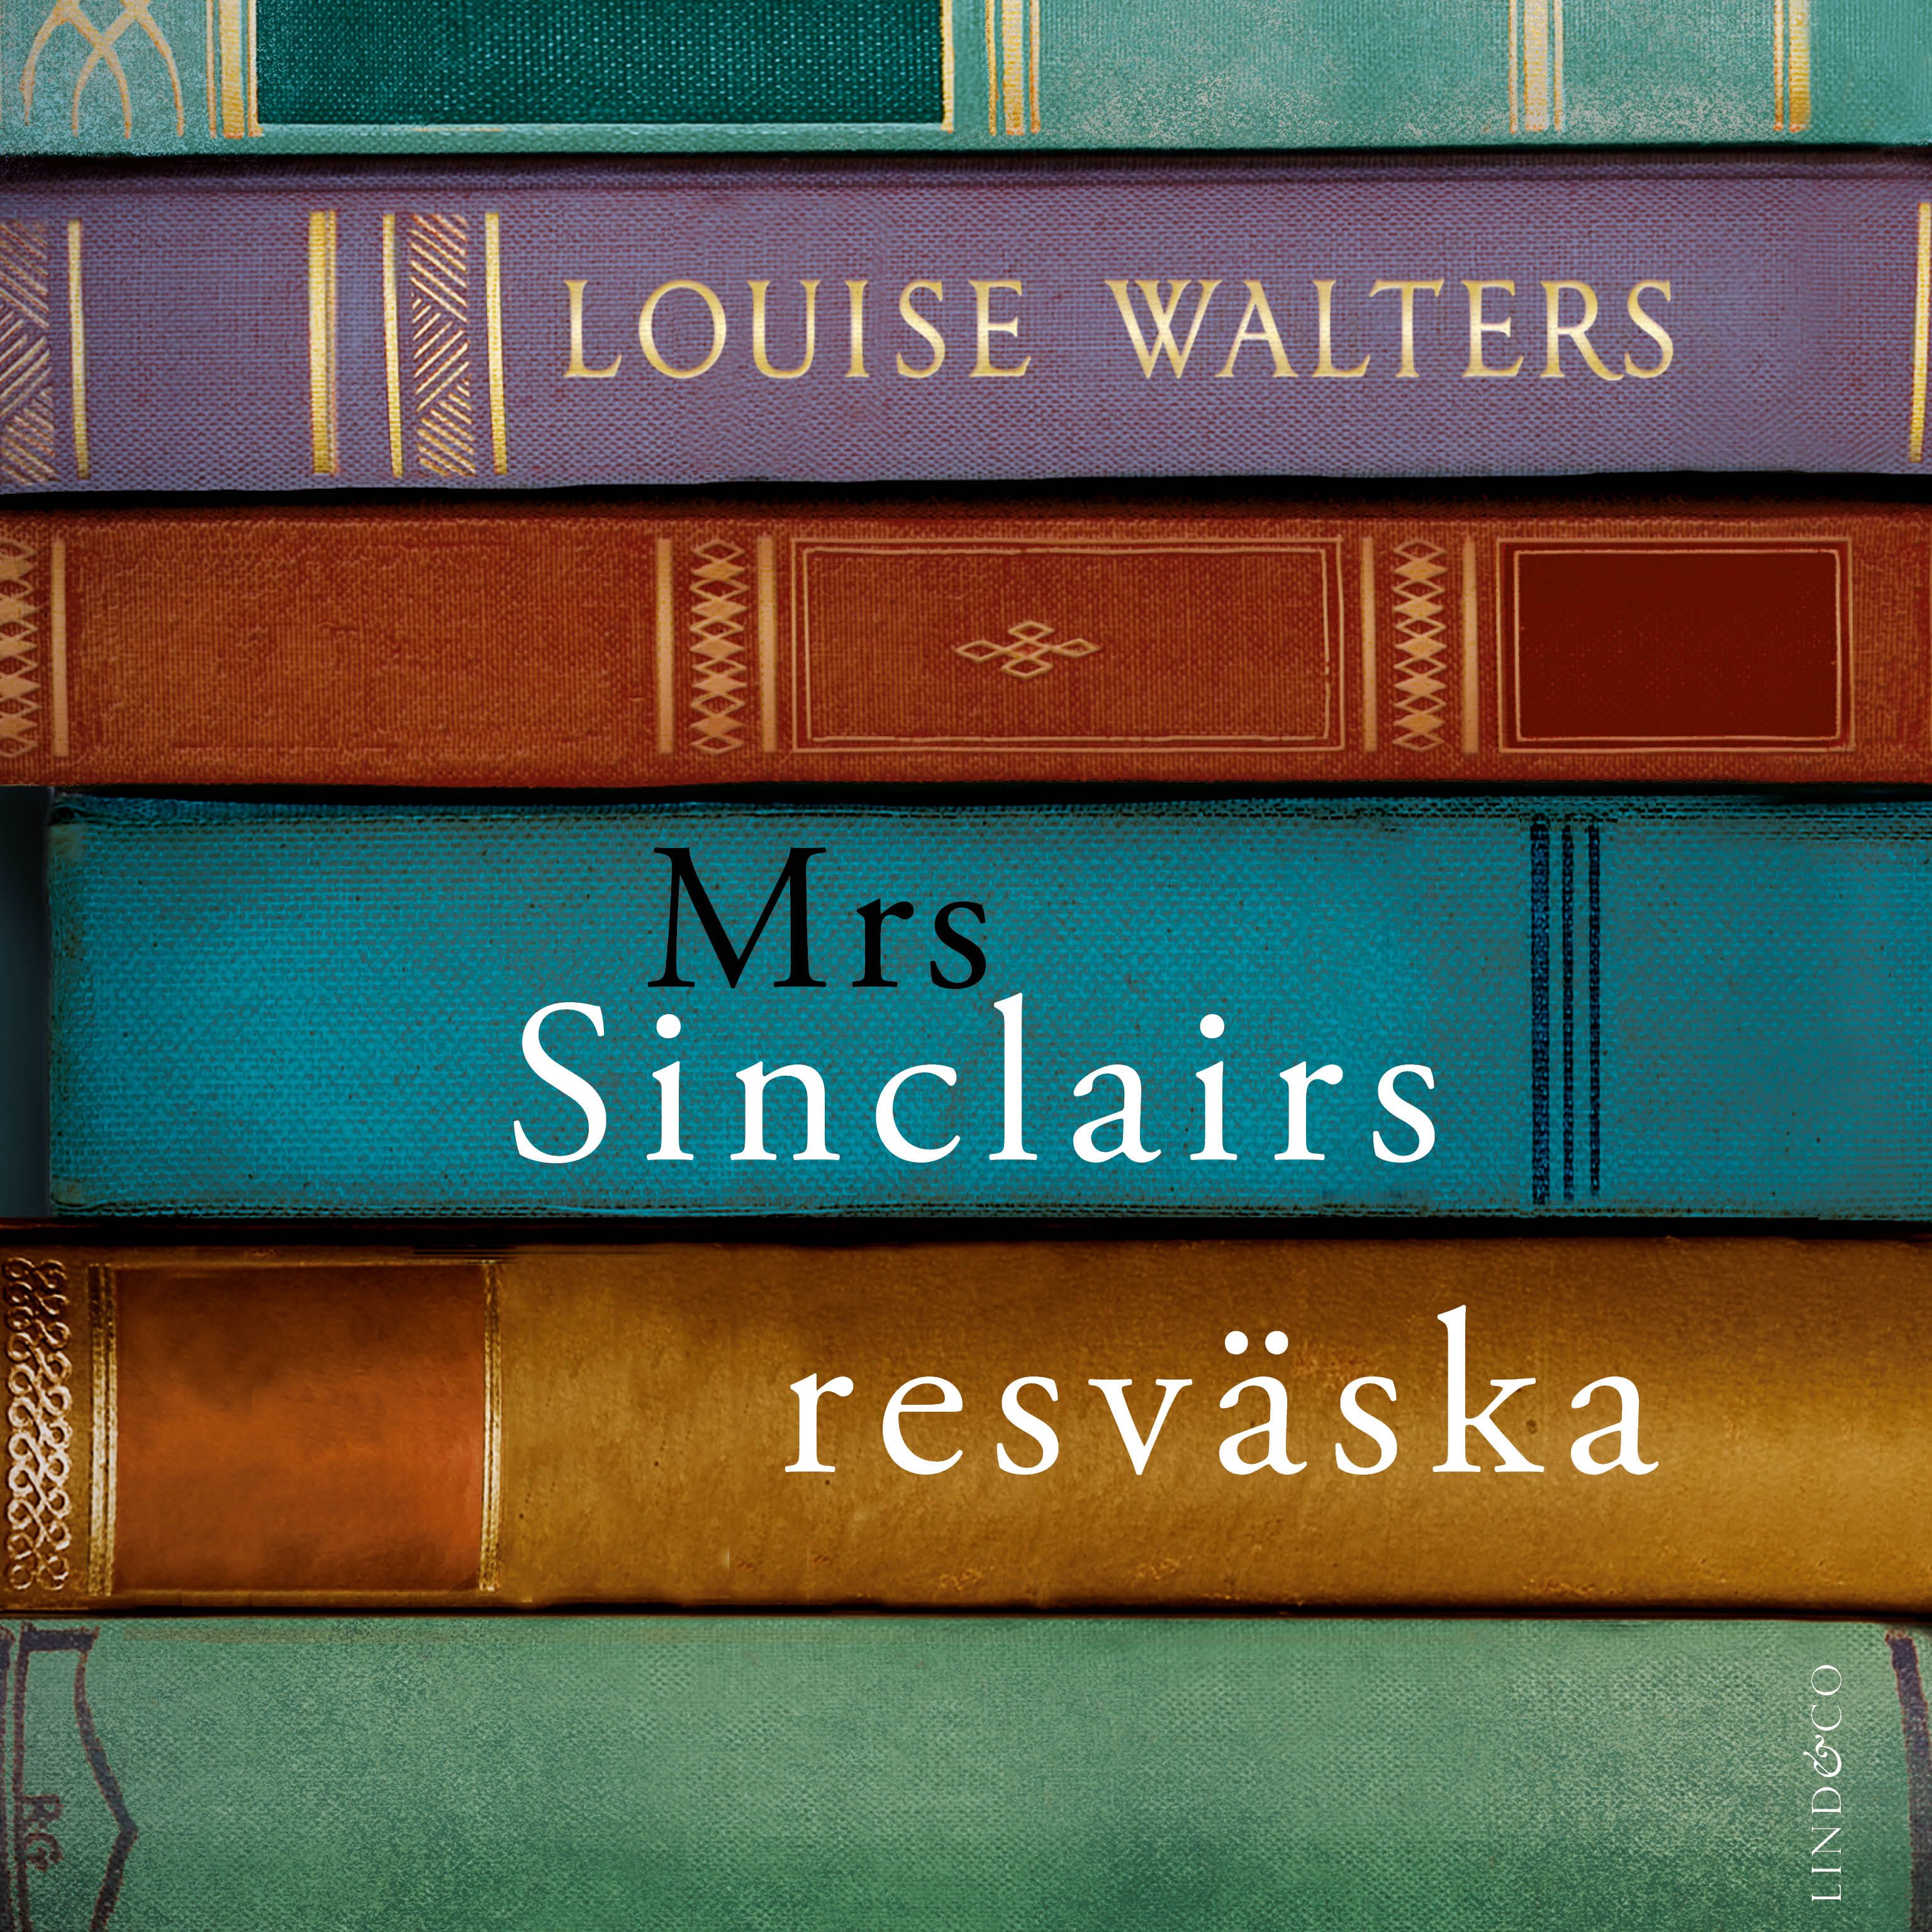 Mrs Sinclairs resväska, audiobook by Louise Walters